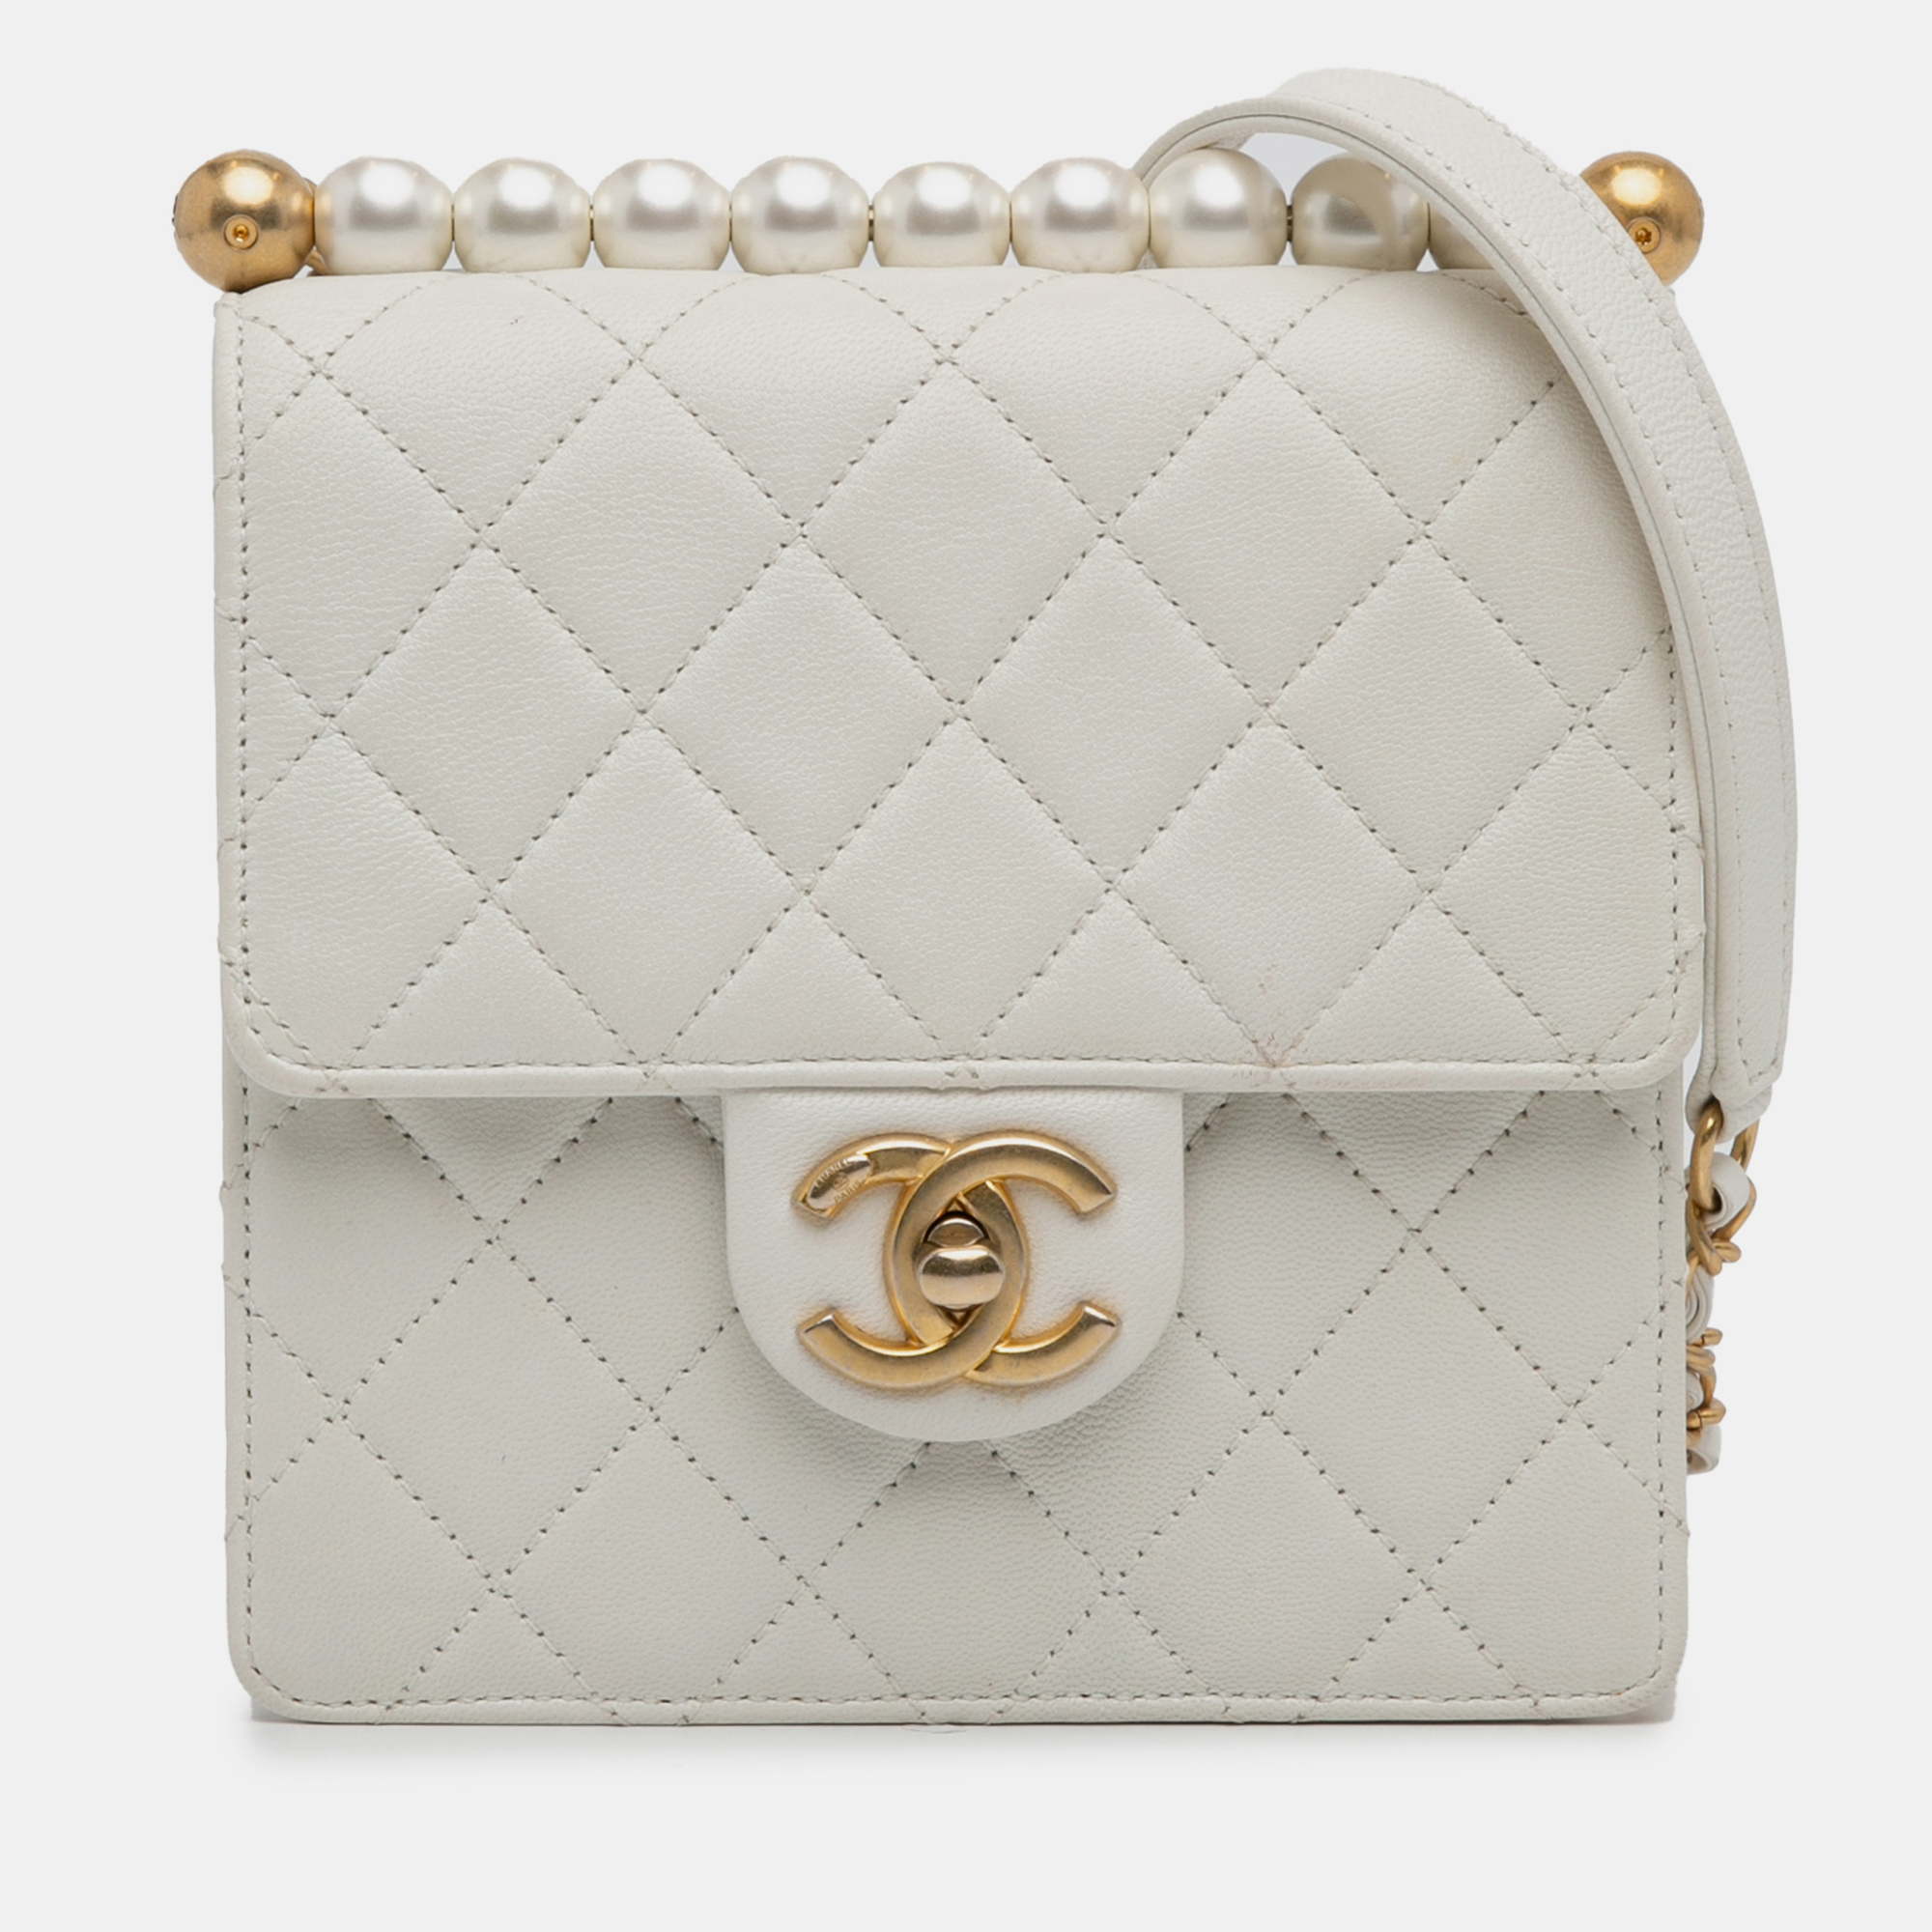 Chanel small chic pearls flap bag